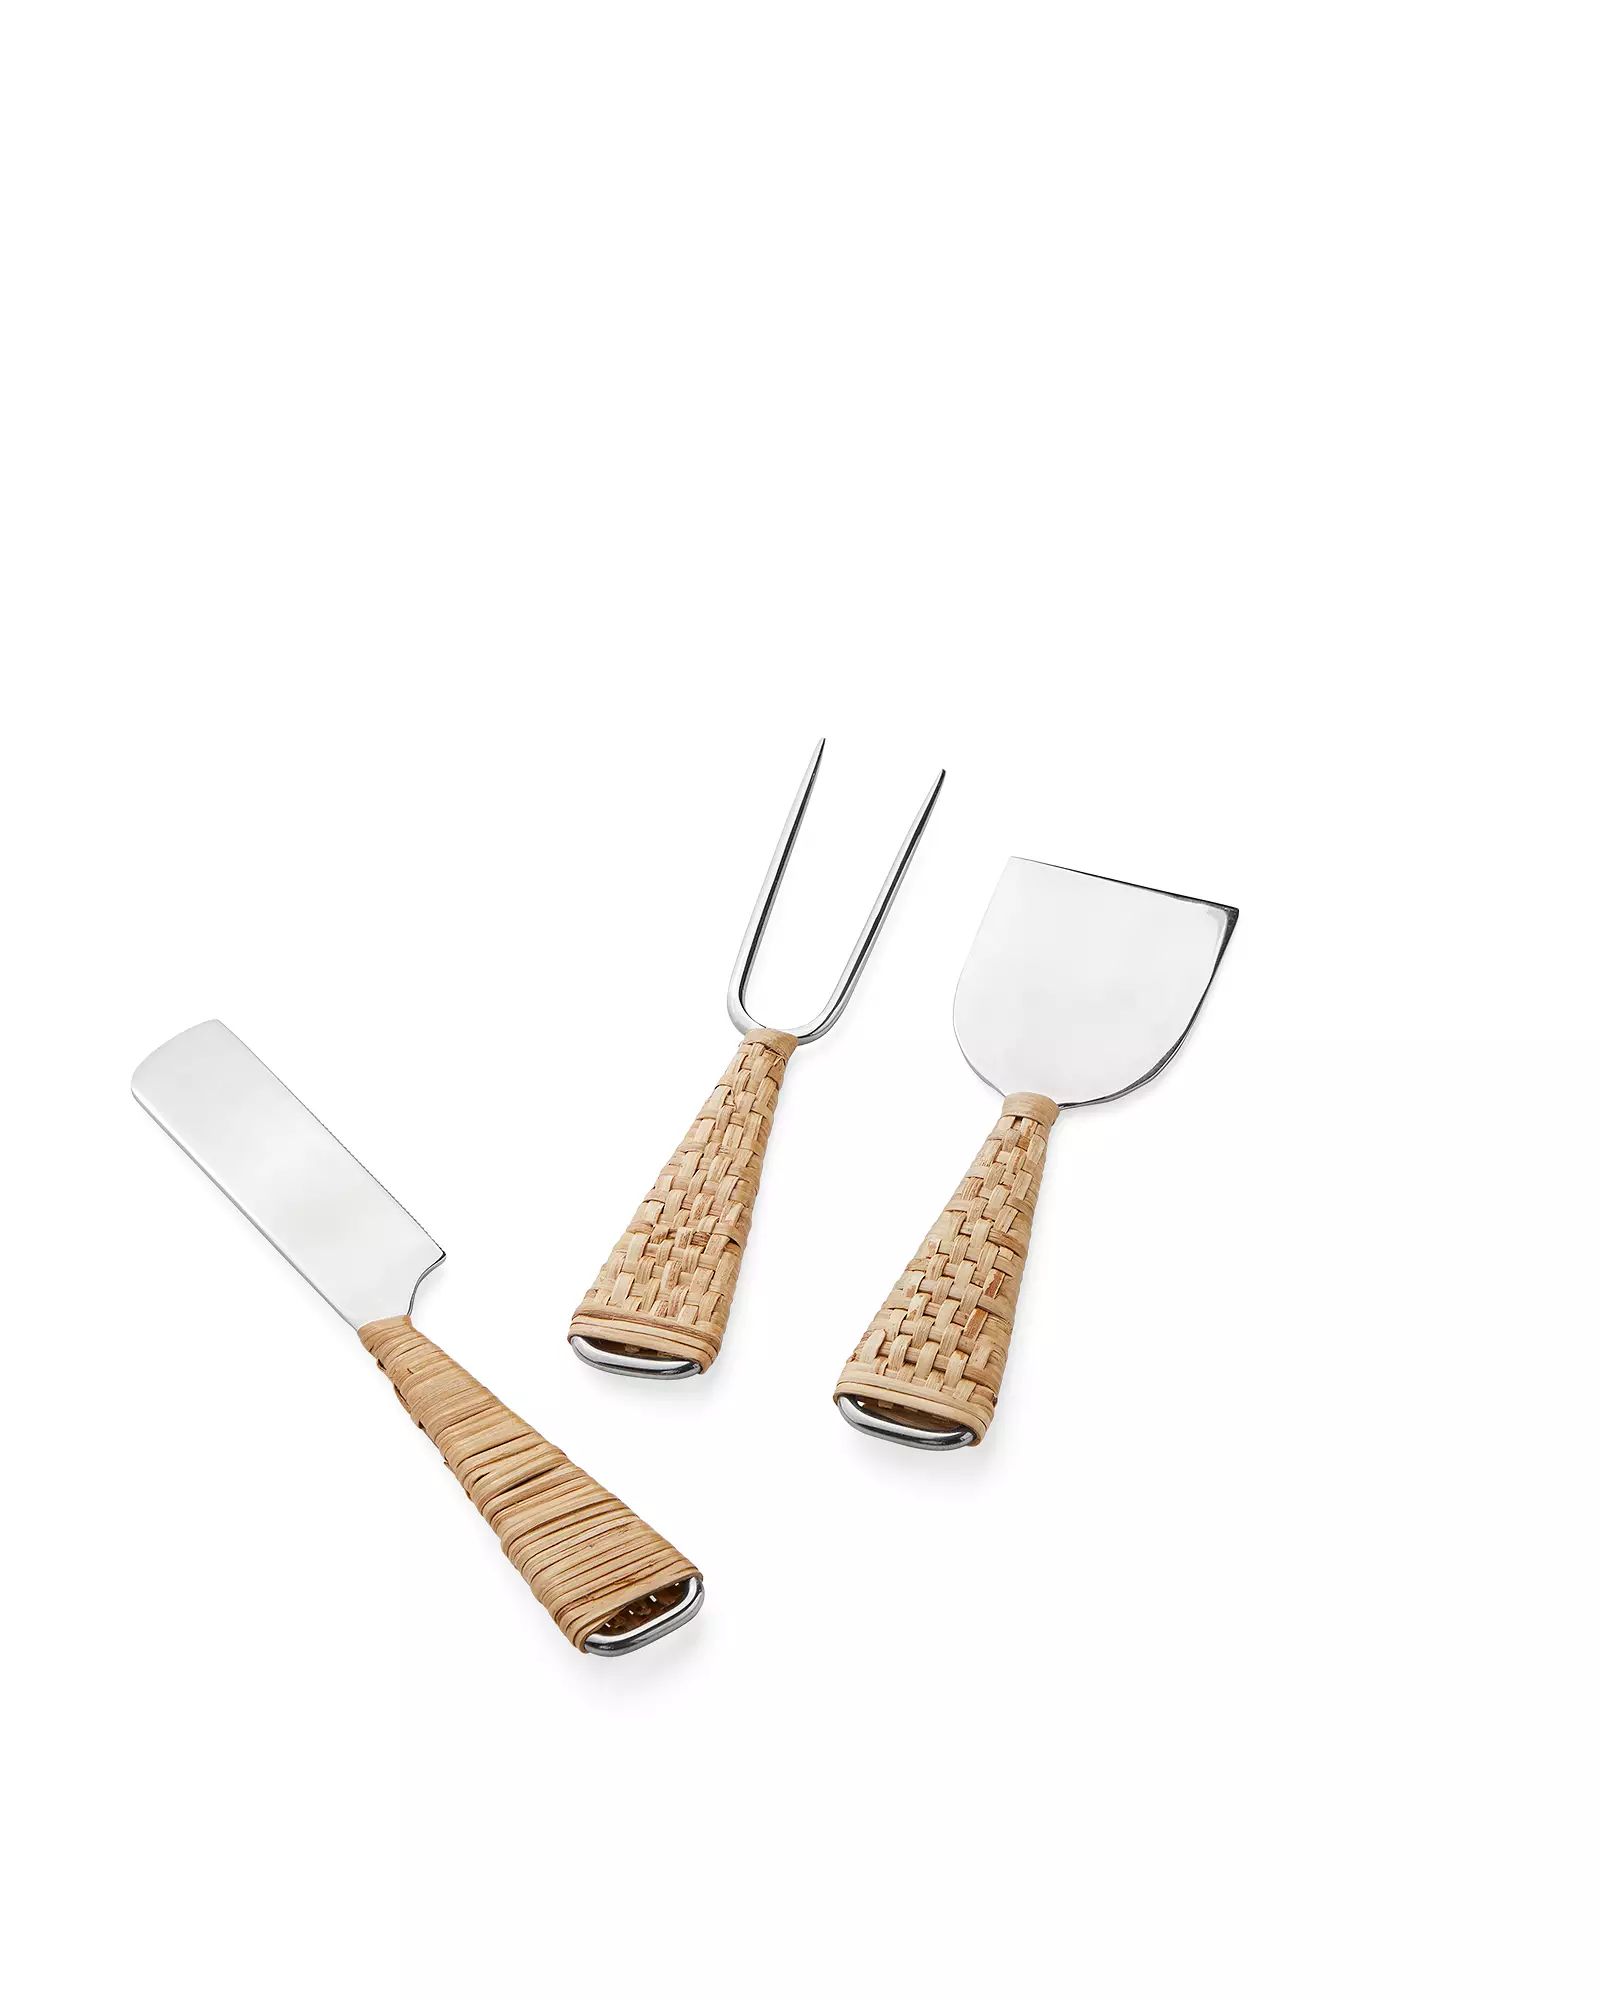 Tulum Rattan Cheese Knife Set | Serena and Lily